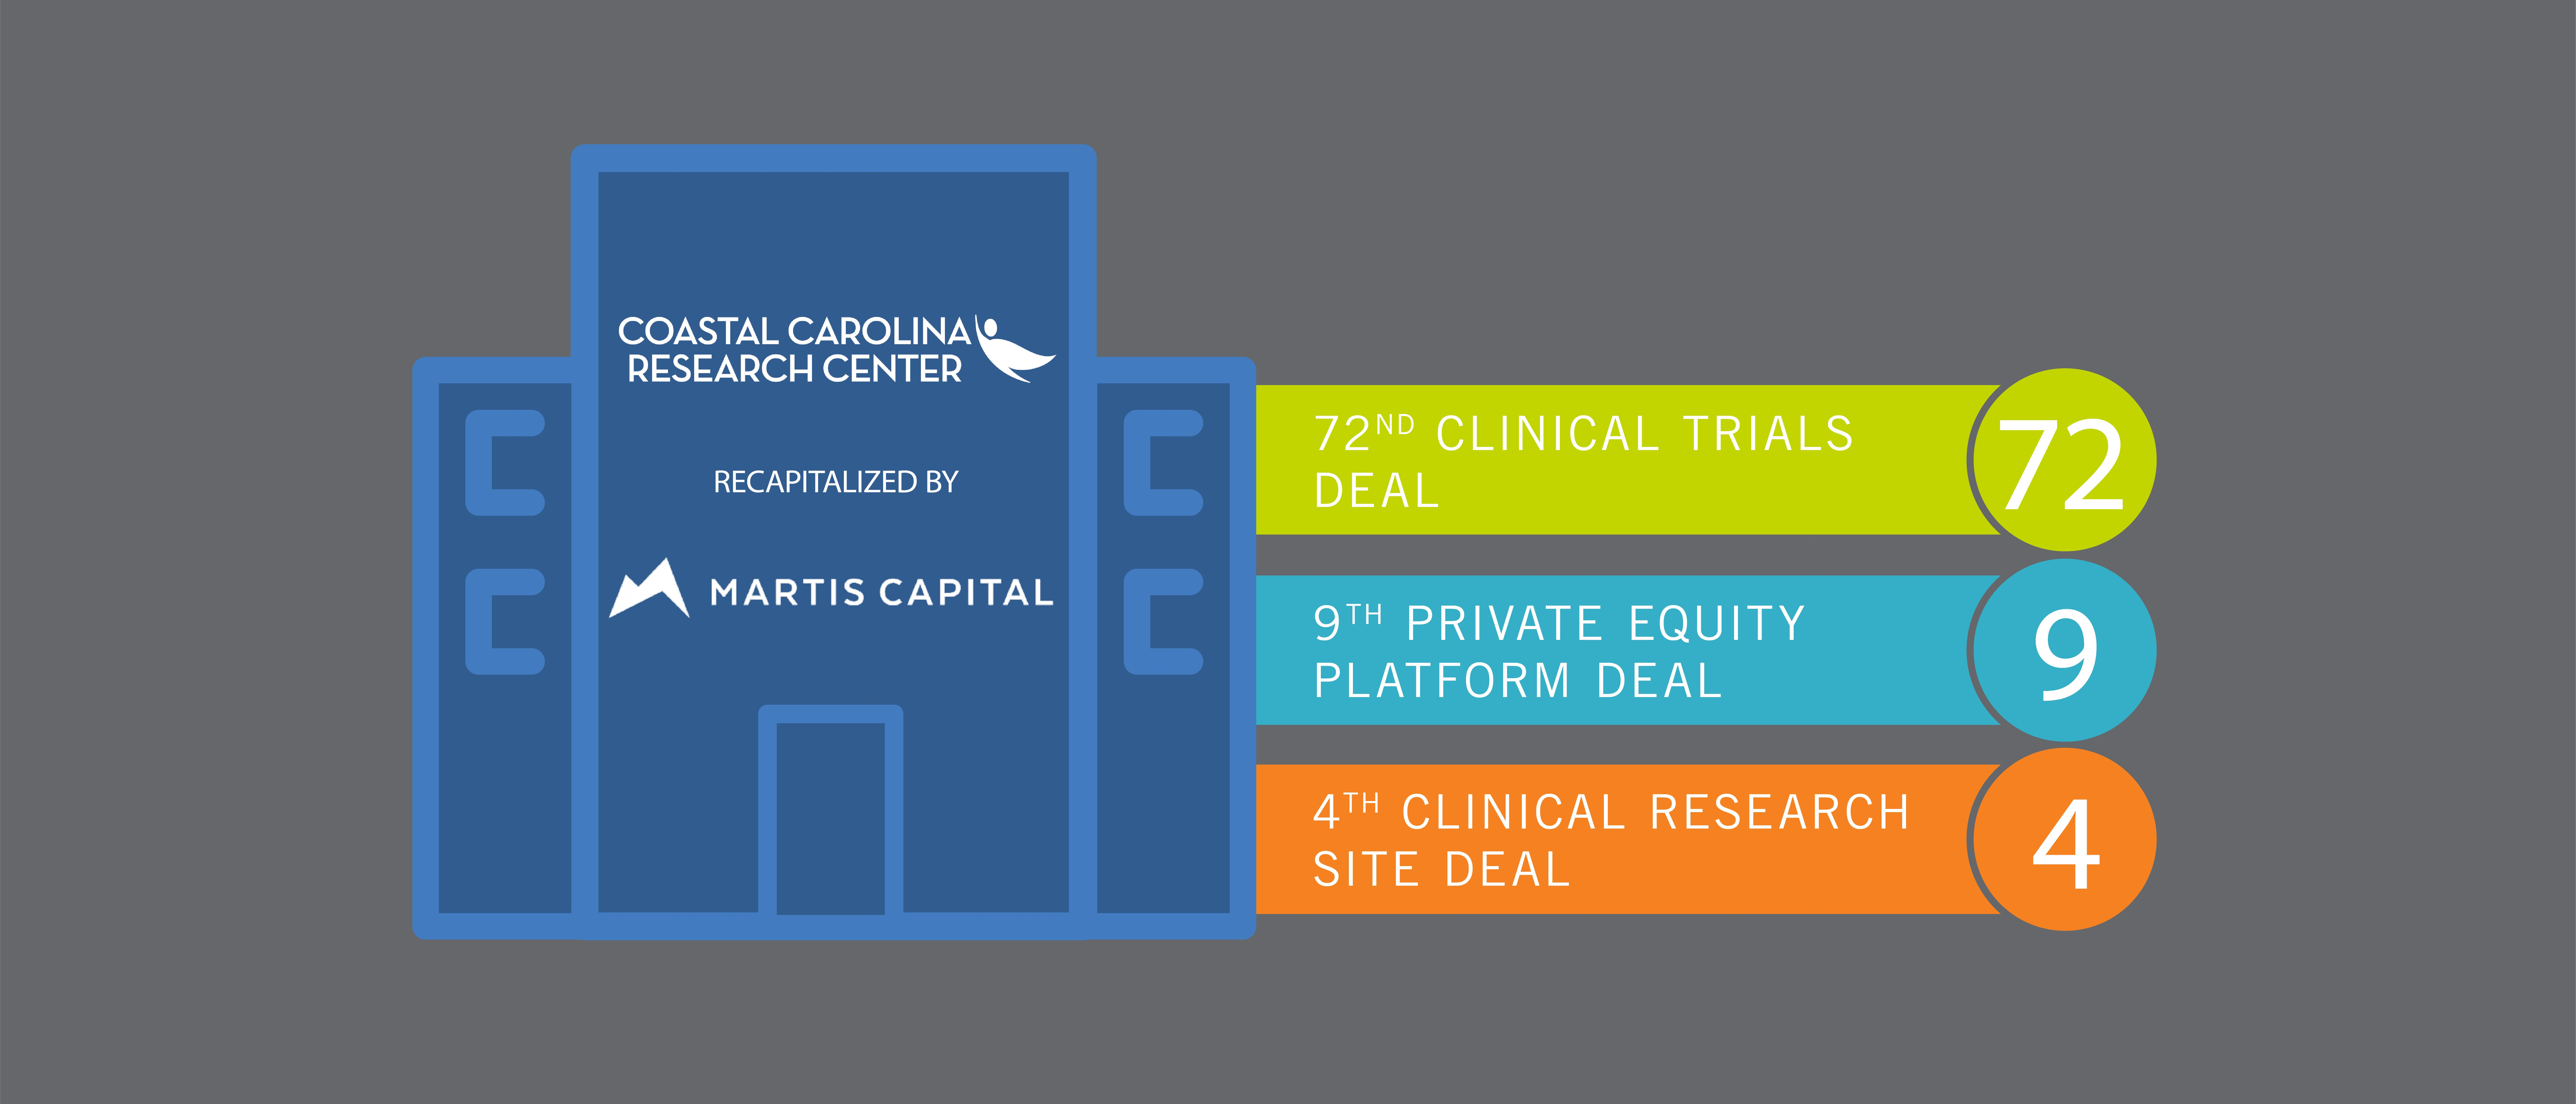 CCRC Recapitalized by Martis Capital Via Its Newly Formed Clinical Research Site Platform, Alcanza Clinical Research